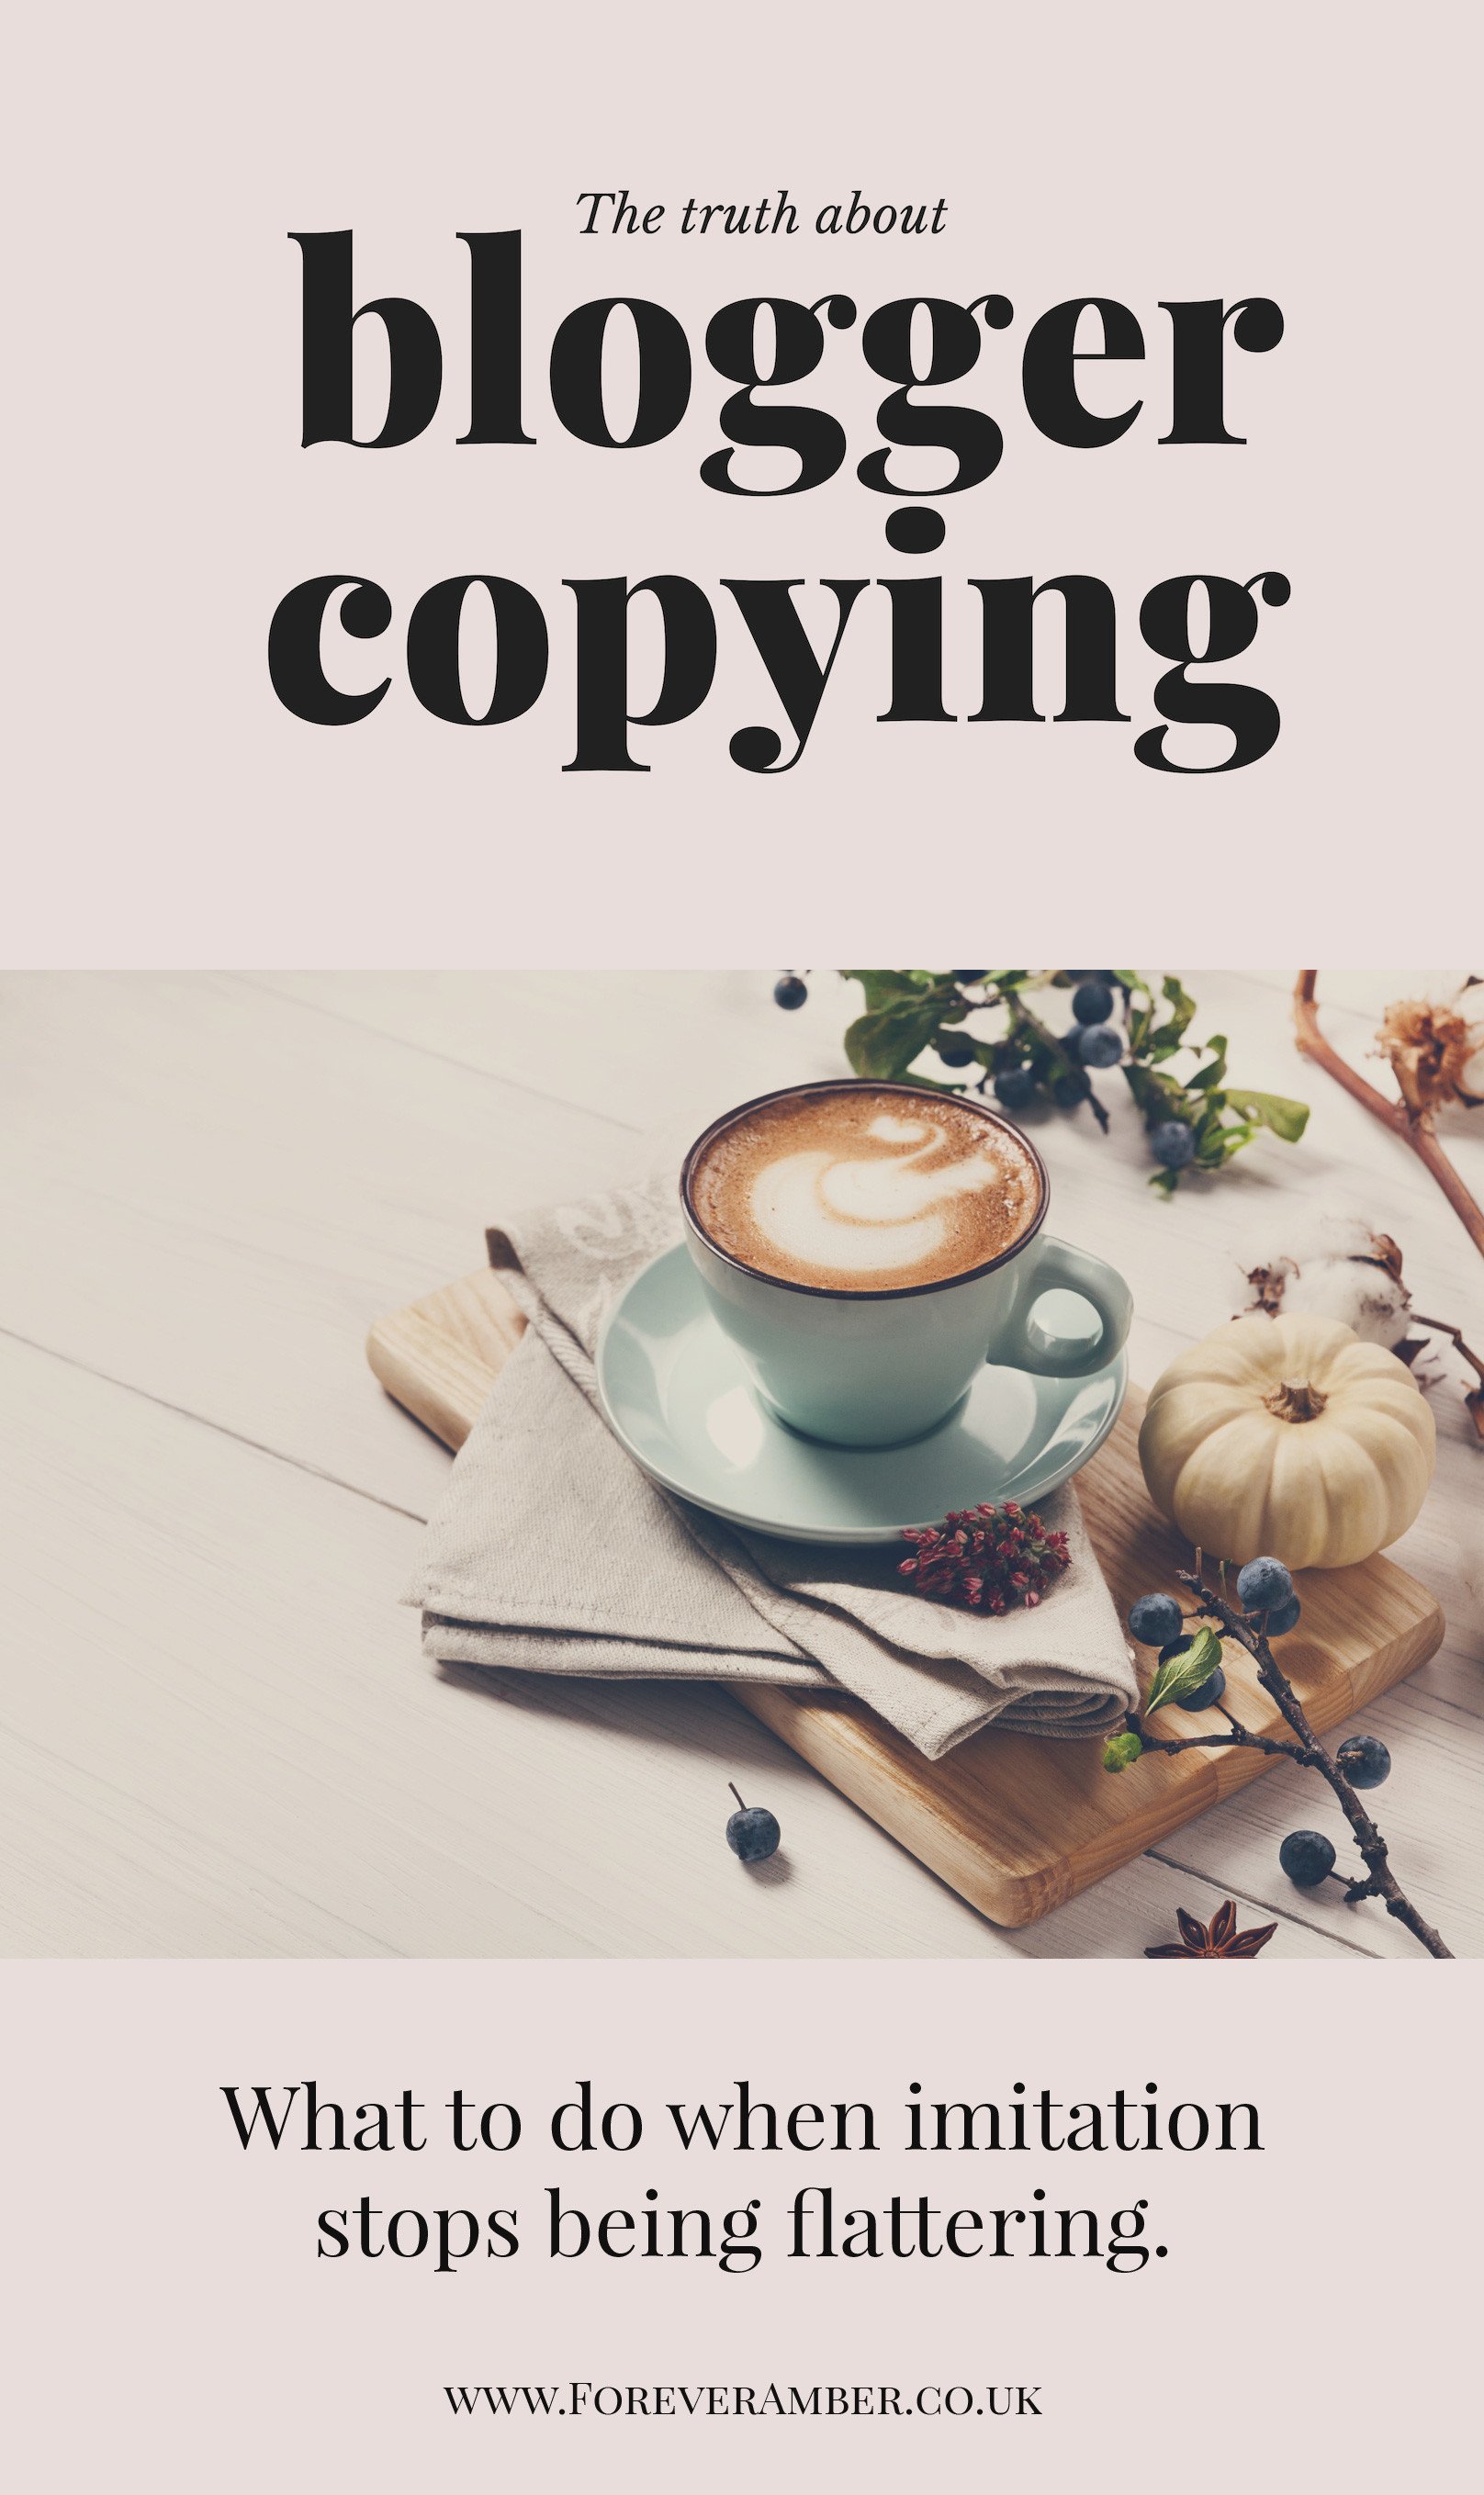 The truth about blogger copying: what to do when your work is copied by another blogger